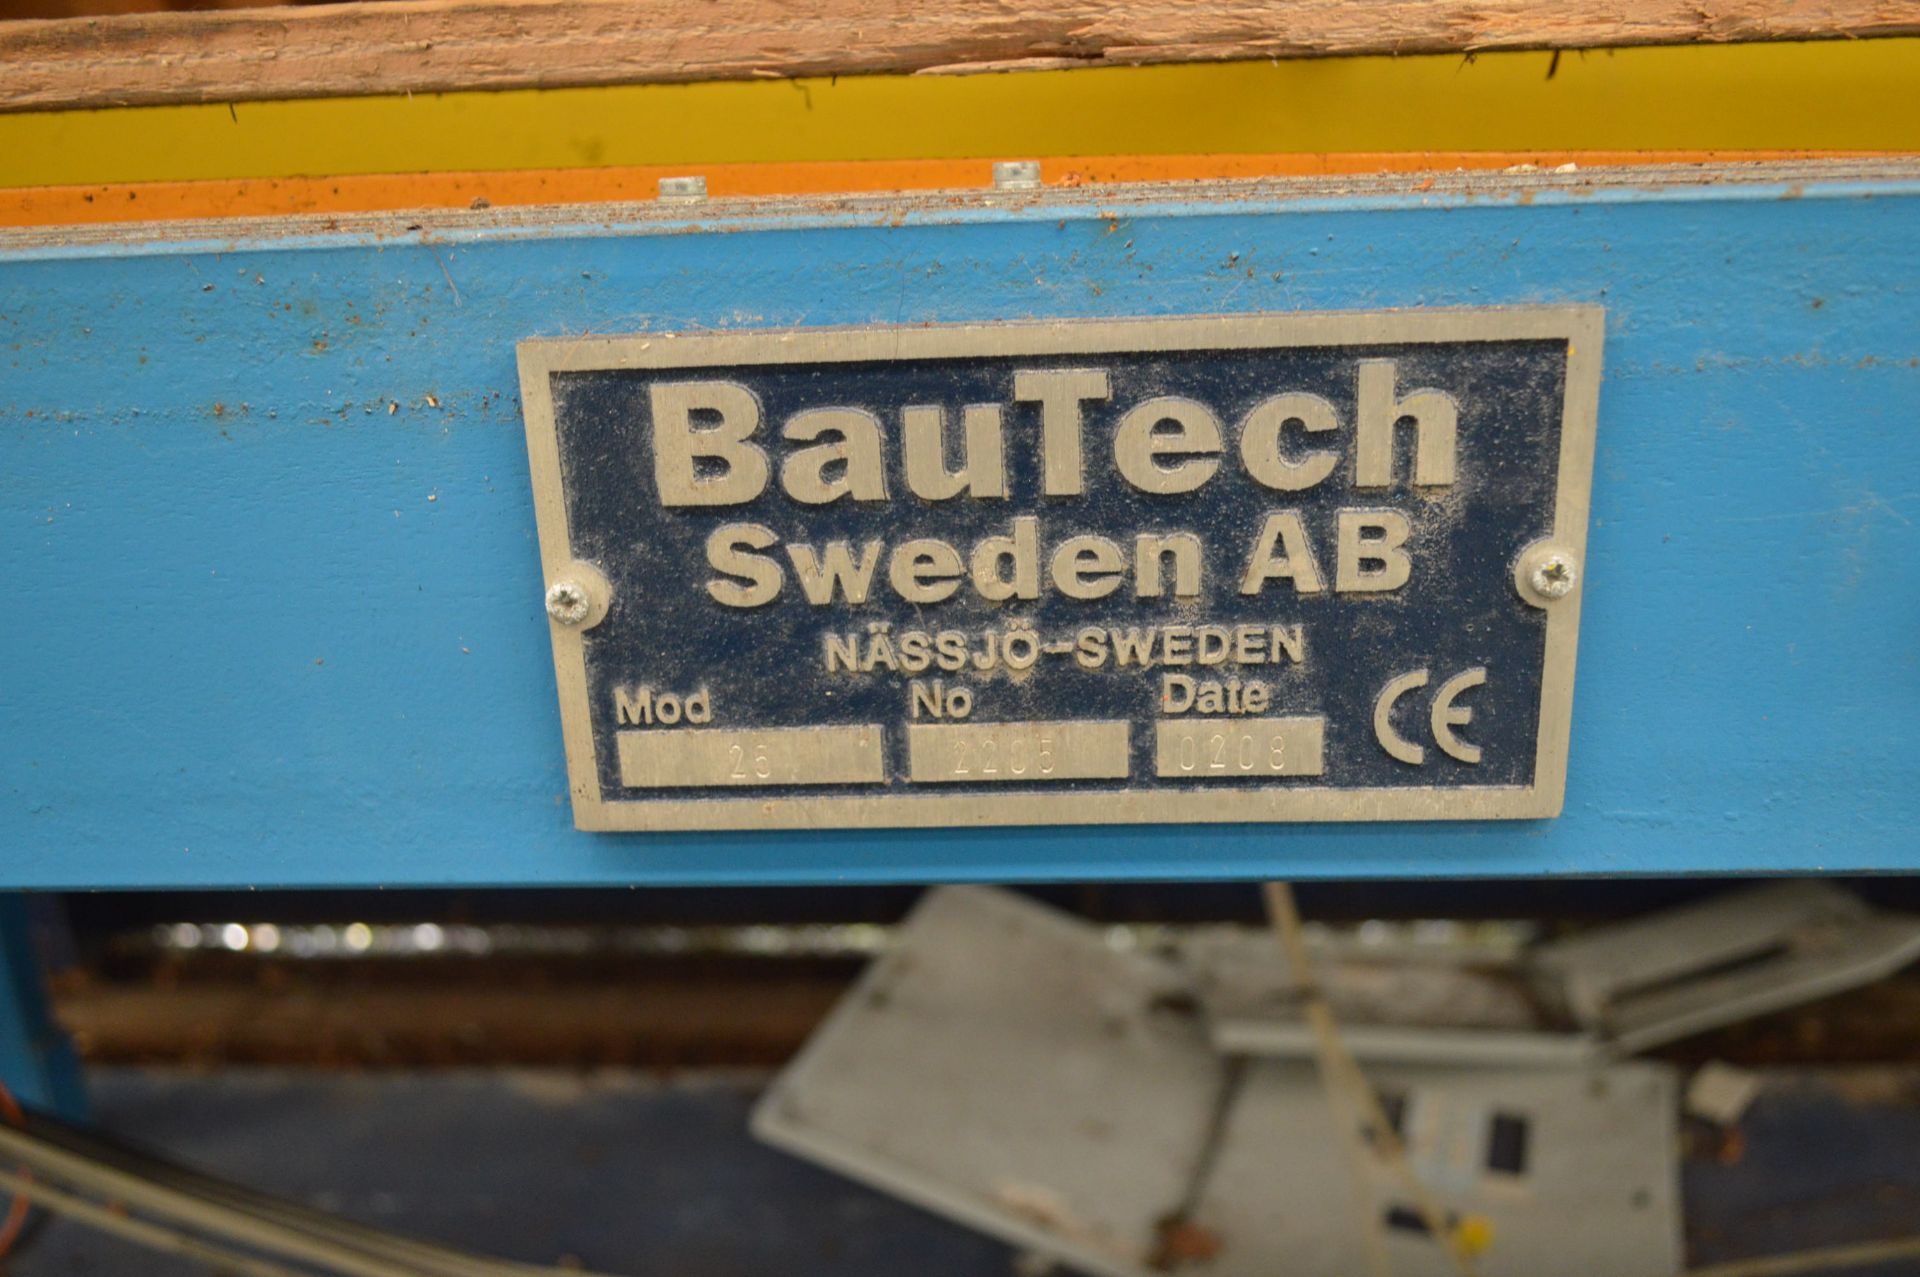 BauTech 25 Powered Roller Conveyor, serial no. 2205, year of manufacture 2008, approx. 1.33m wide on - Image 2 of 2